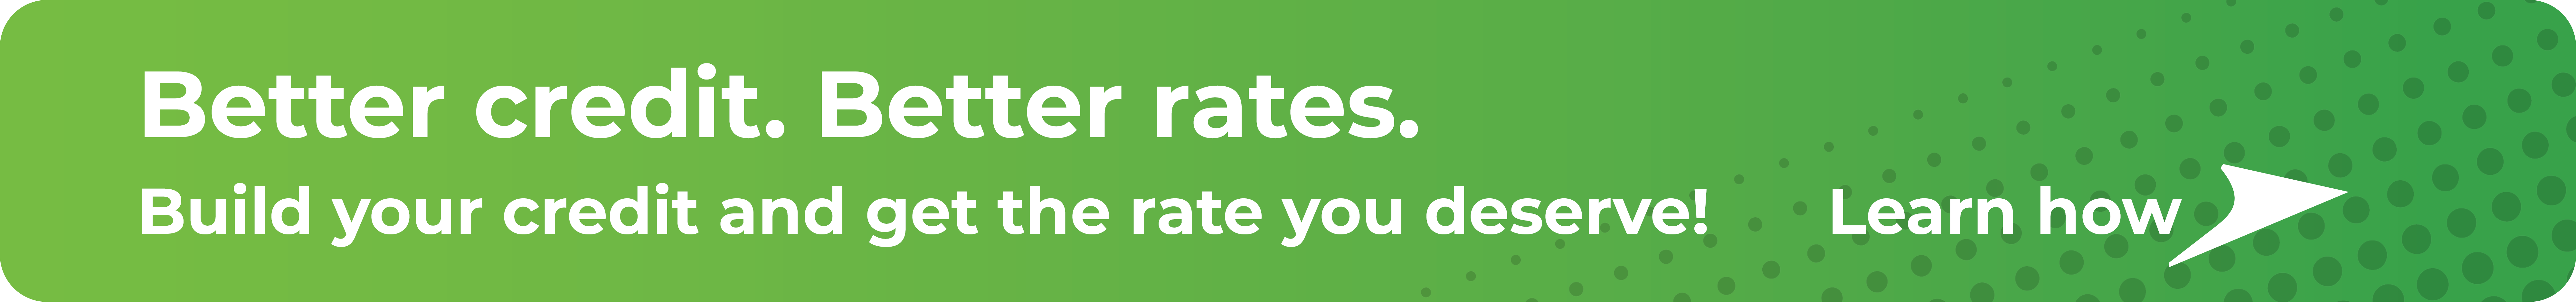 Better Credit. Better Rates. Build your credit and get the rate you deserve! Learn how.